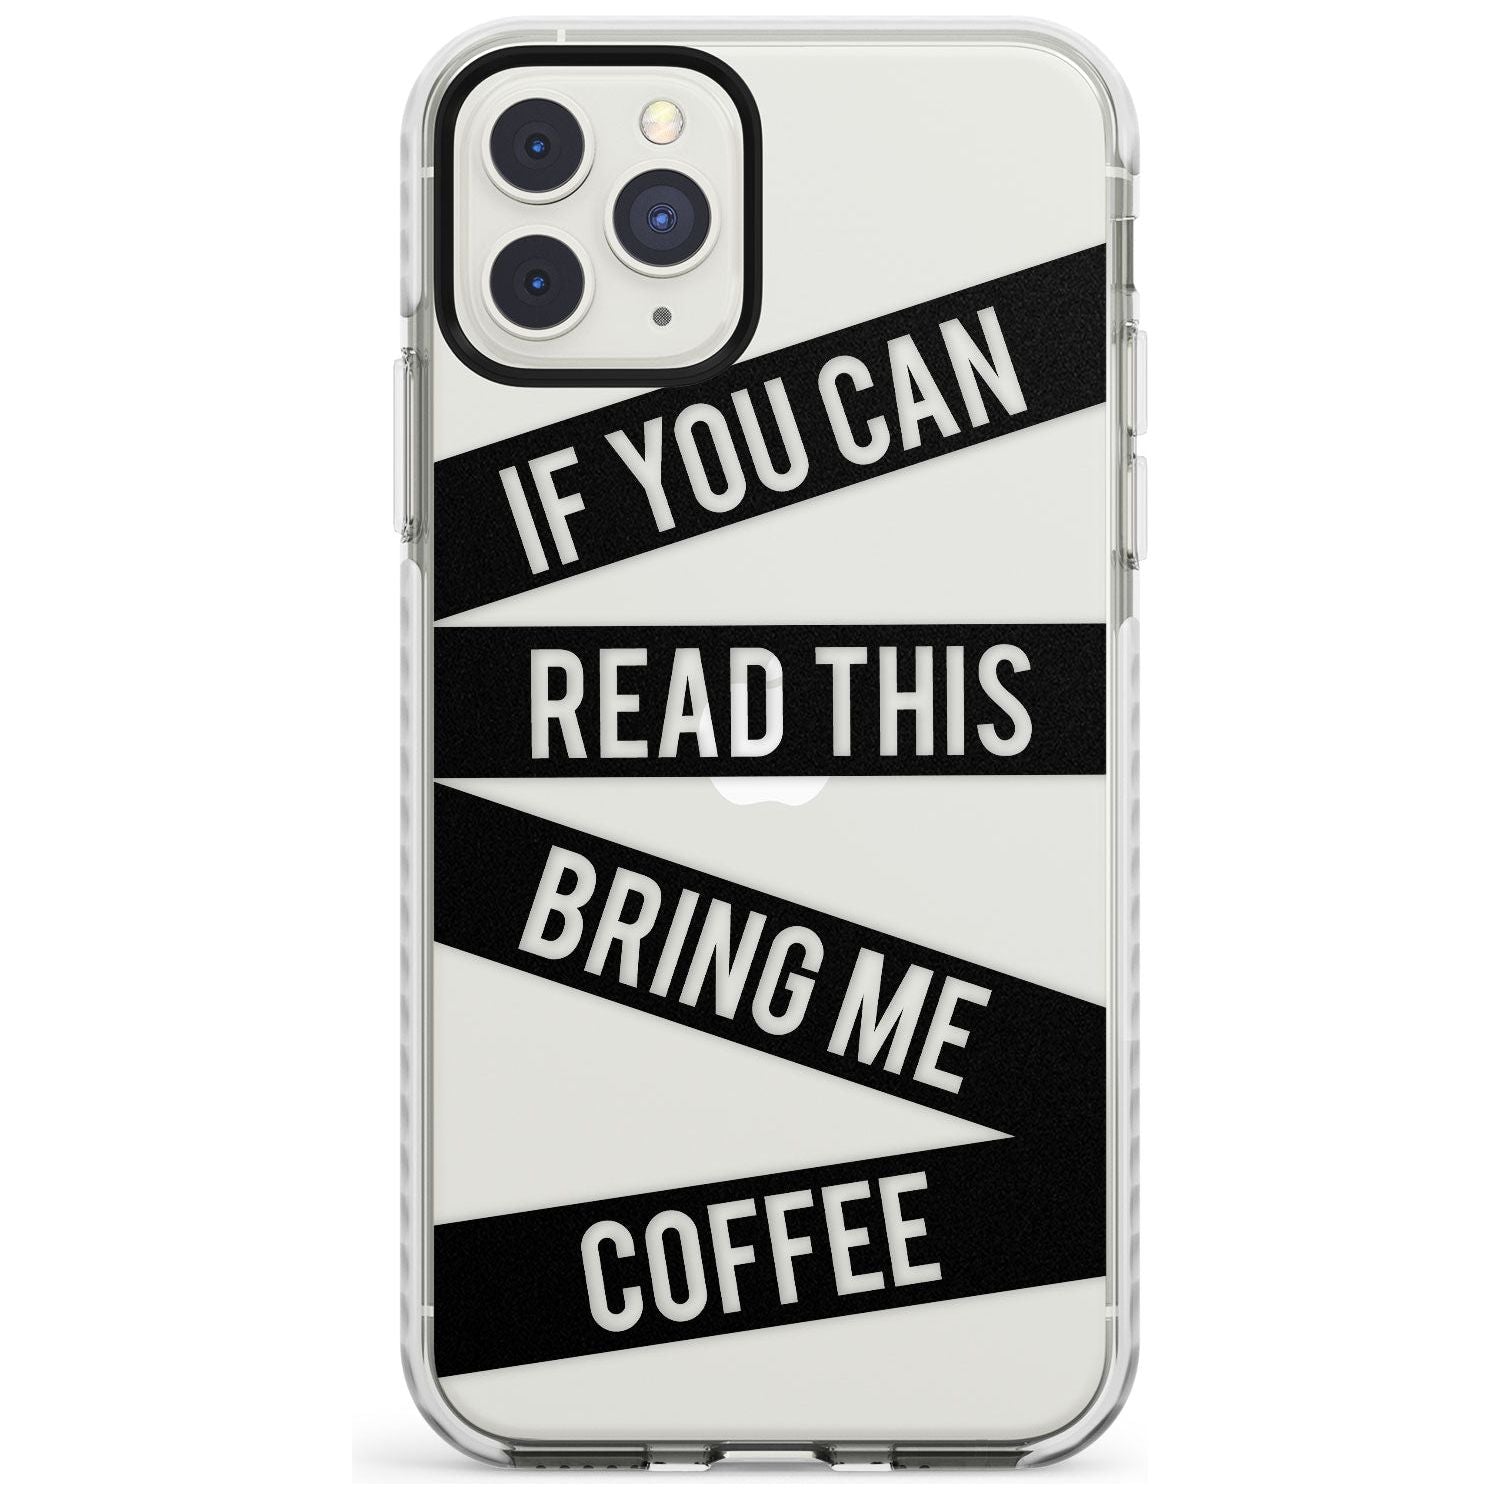 Black Stripes Bring Me Coffee Impact Phone Case for iPhone 11 Pro Max